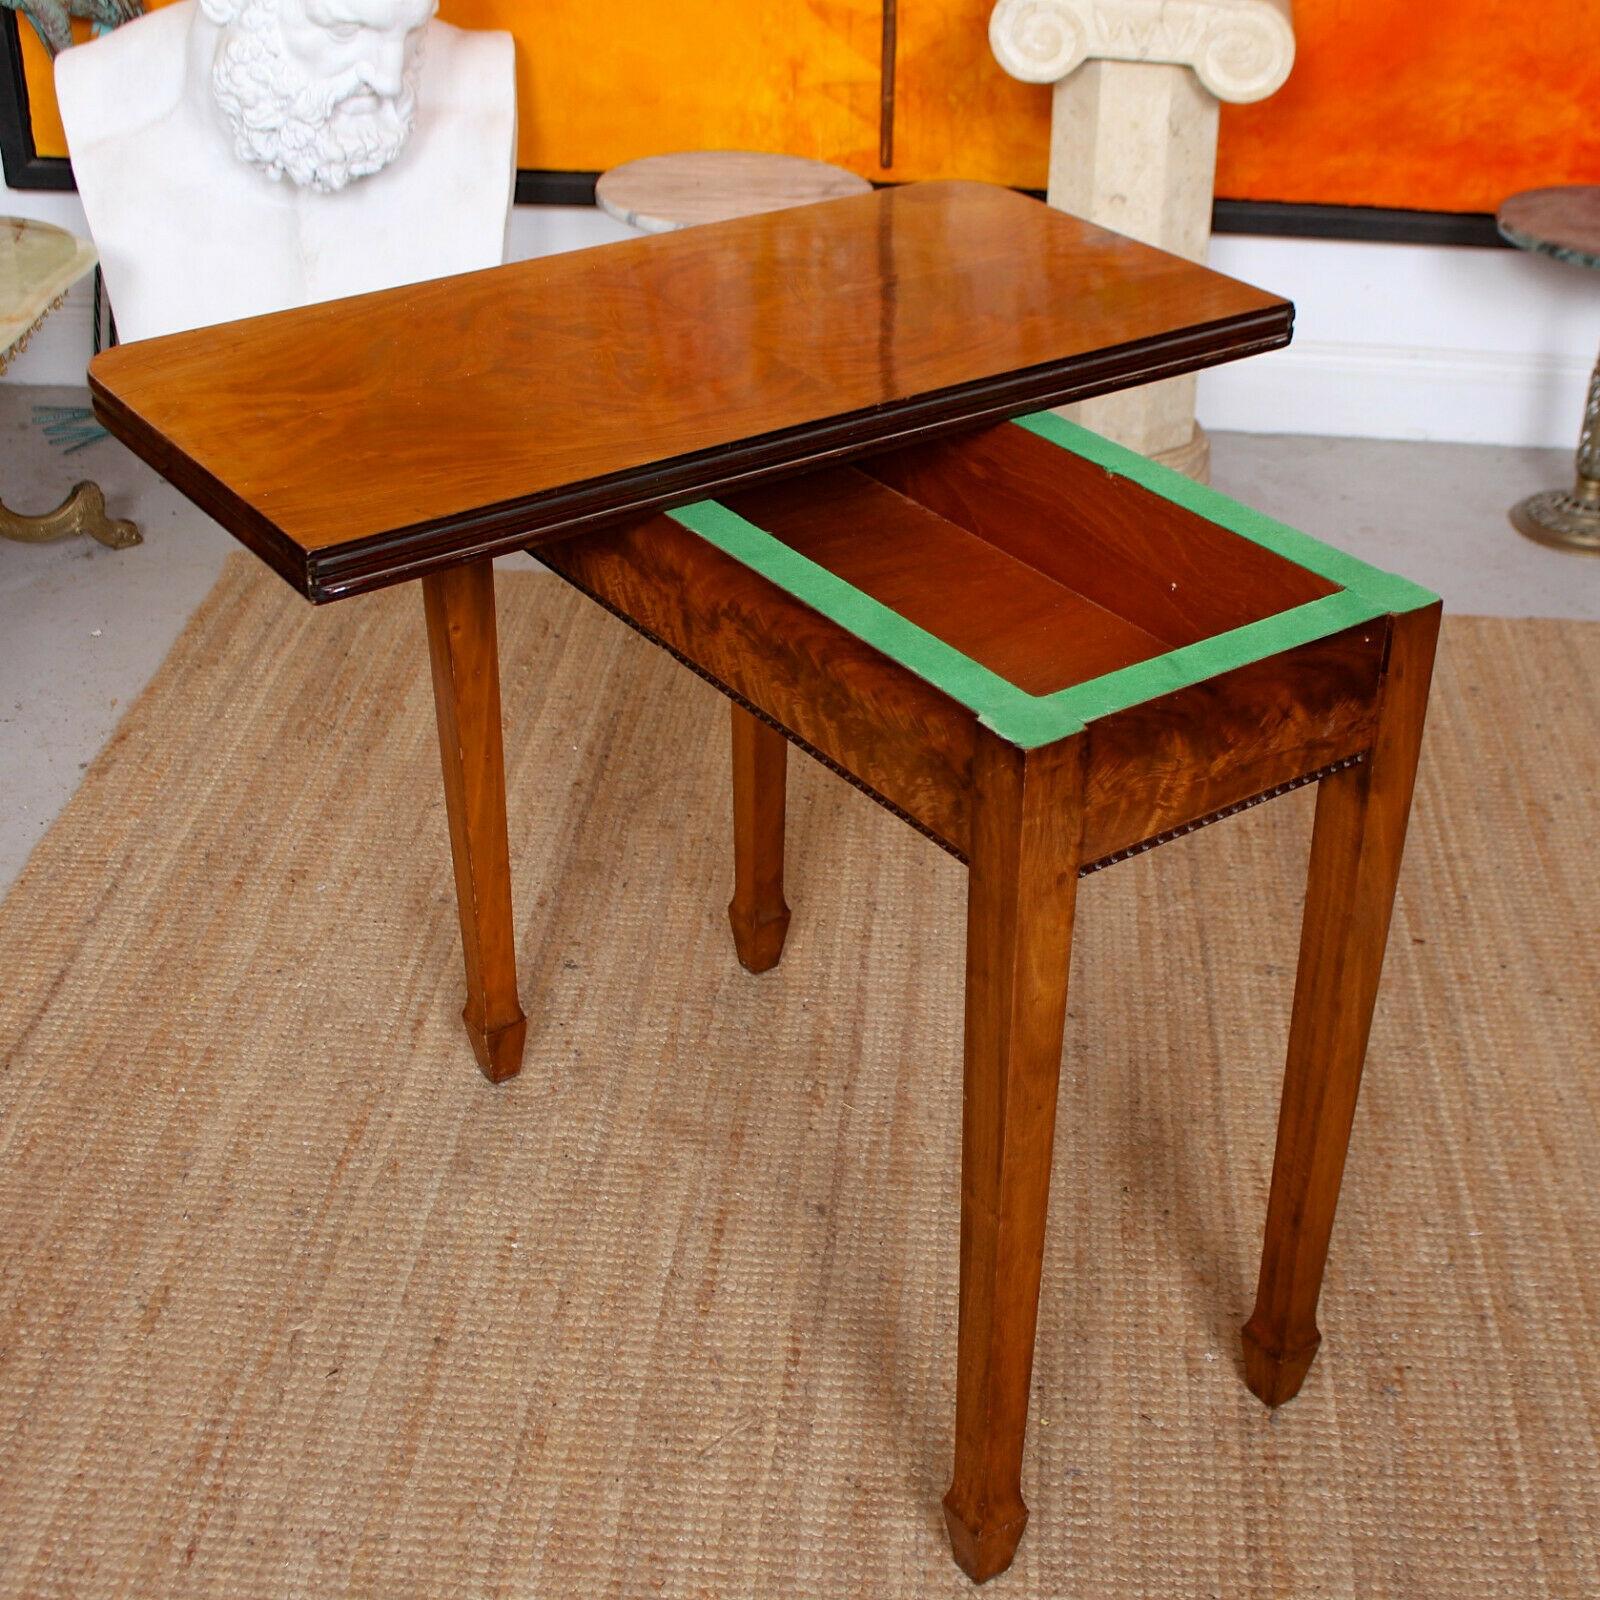 An impressive 19th century flamed mahogany foldover table.
The folding hinged top with rounded corners and enclosed a fine quality flamed mahogany boasting a well figured grain. The marquetry work apron with carved beaded detailed and raise don